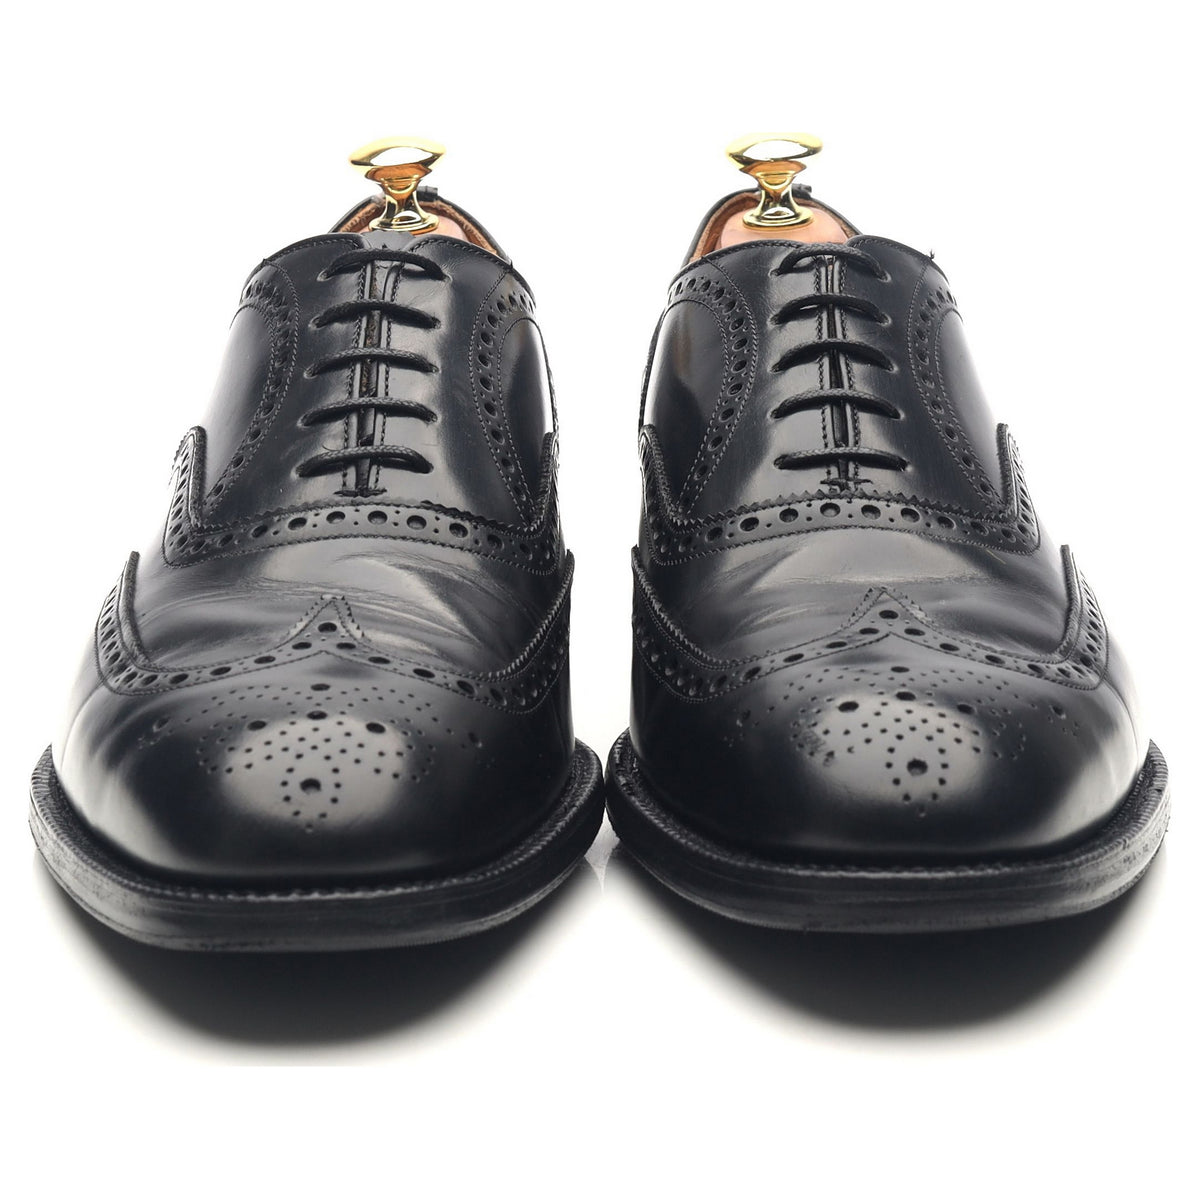 &#39;Cullen&#39; Black Leather Brogues UK 8.5 G